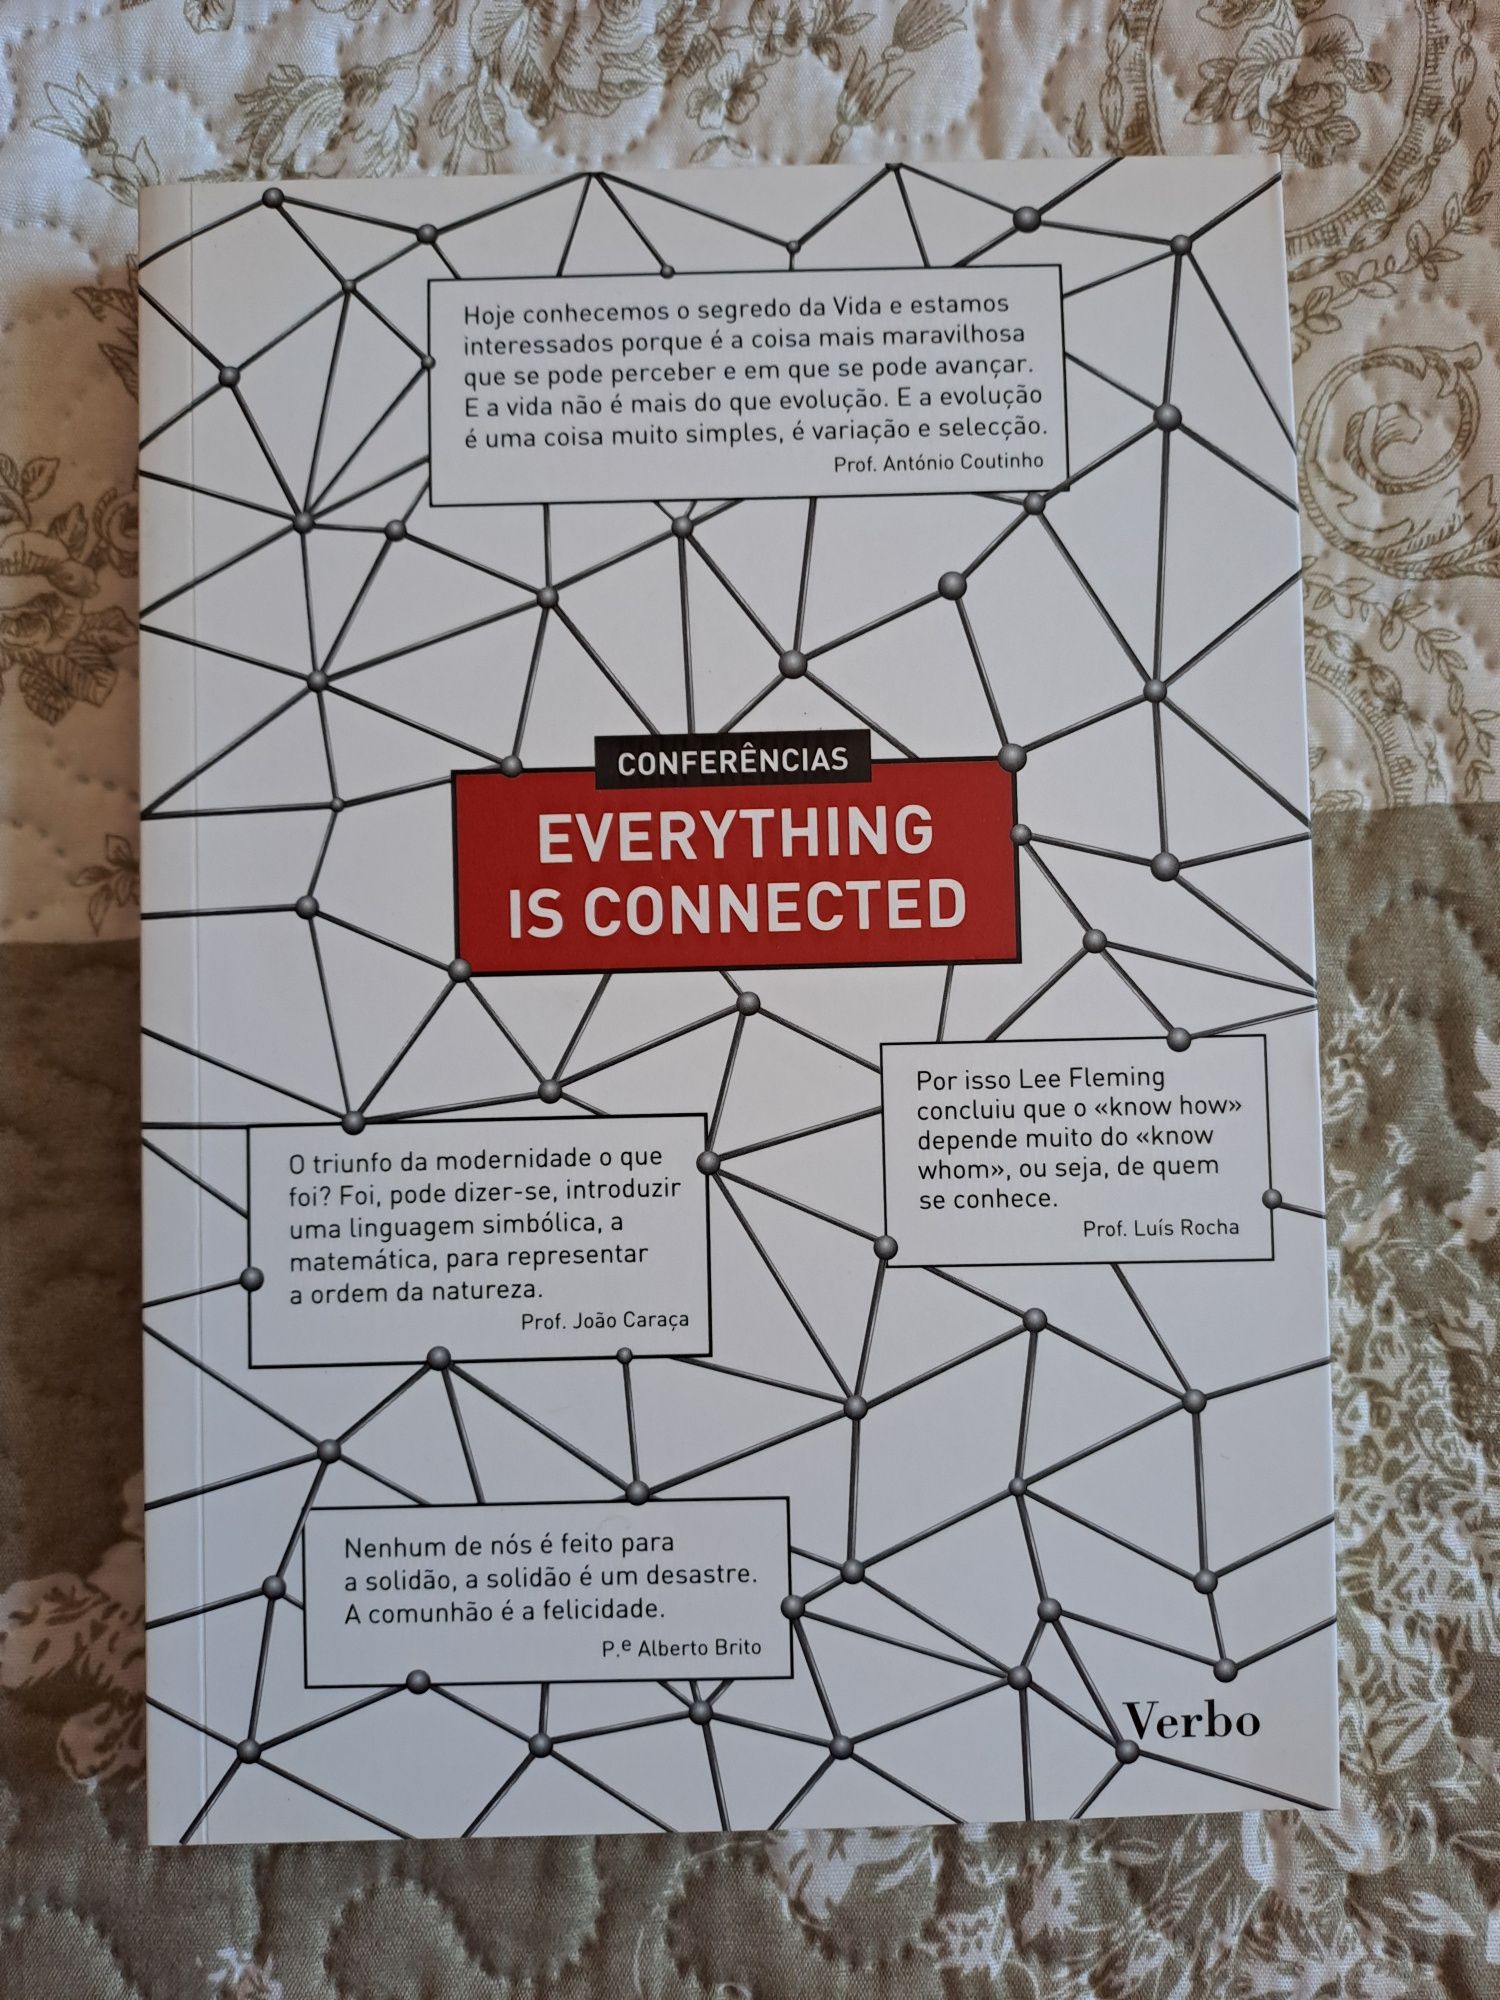 Livro " Conferências, Everything is Connected"